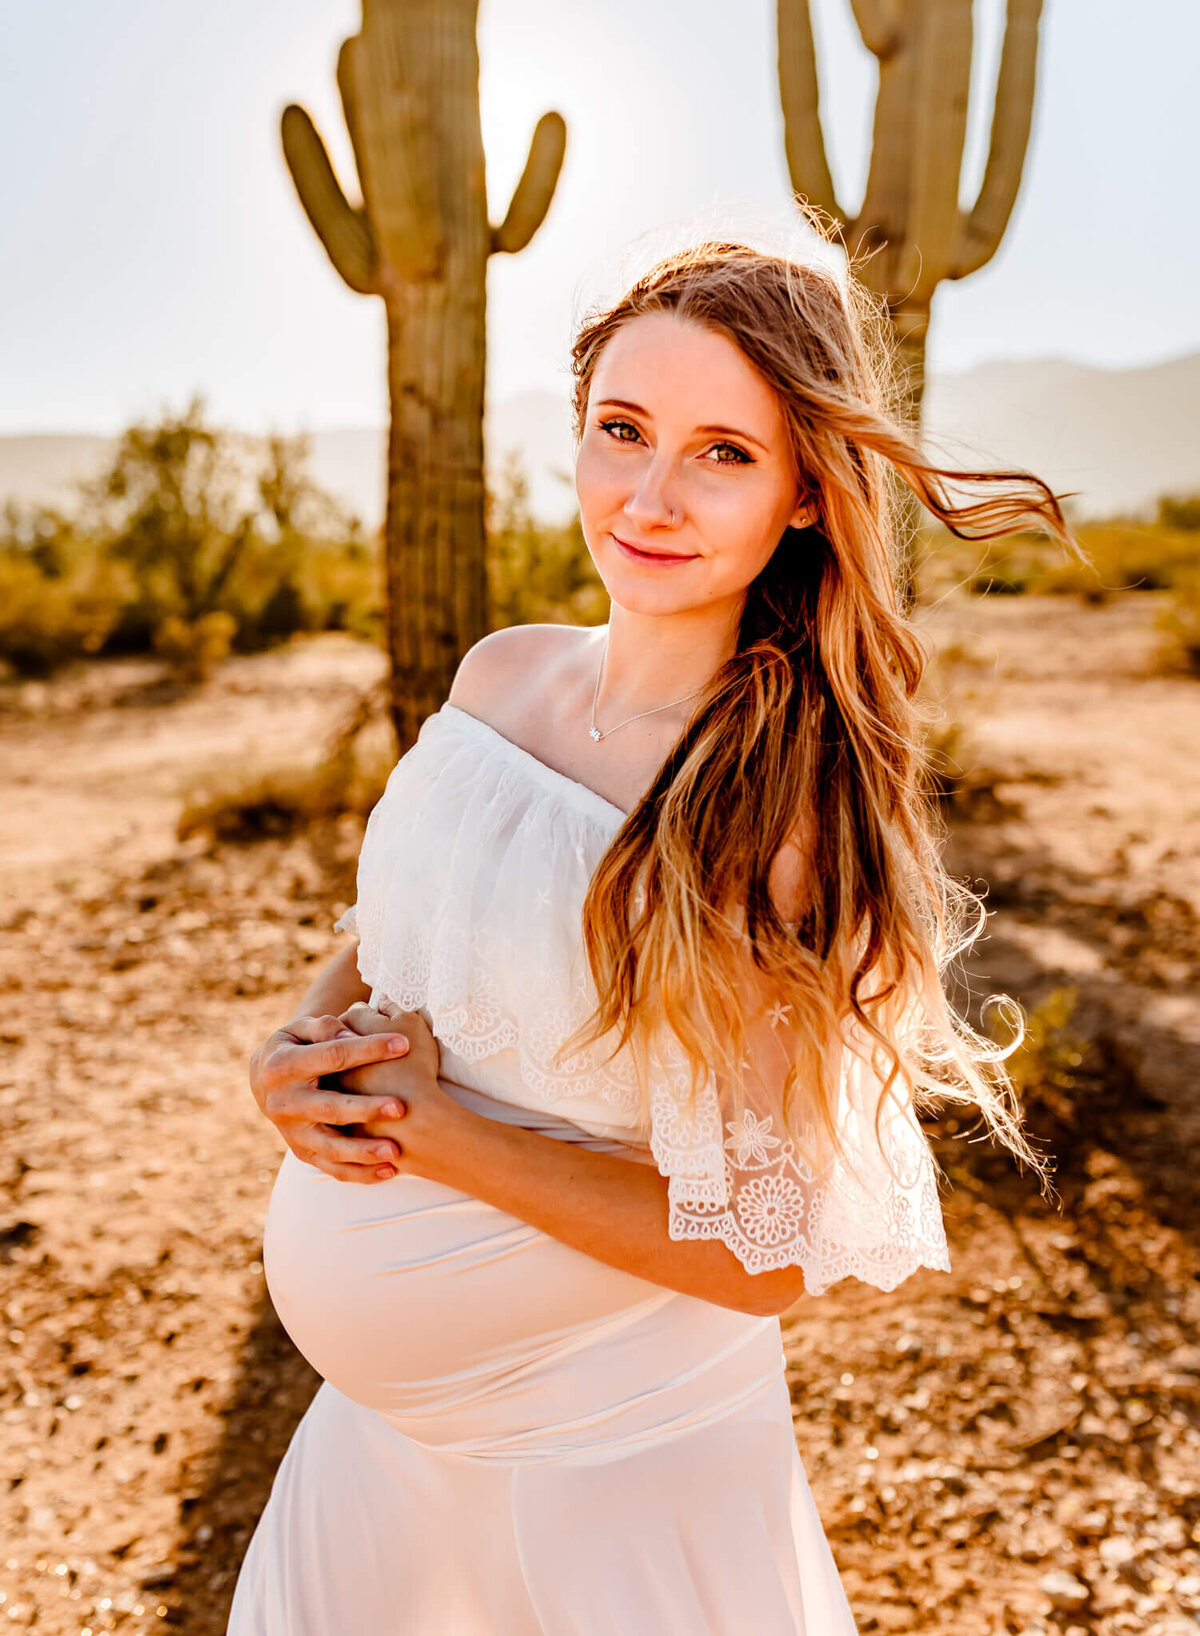 Mom-to-be smiling in Arizona desert while holding her belly for photography